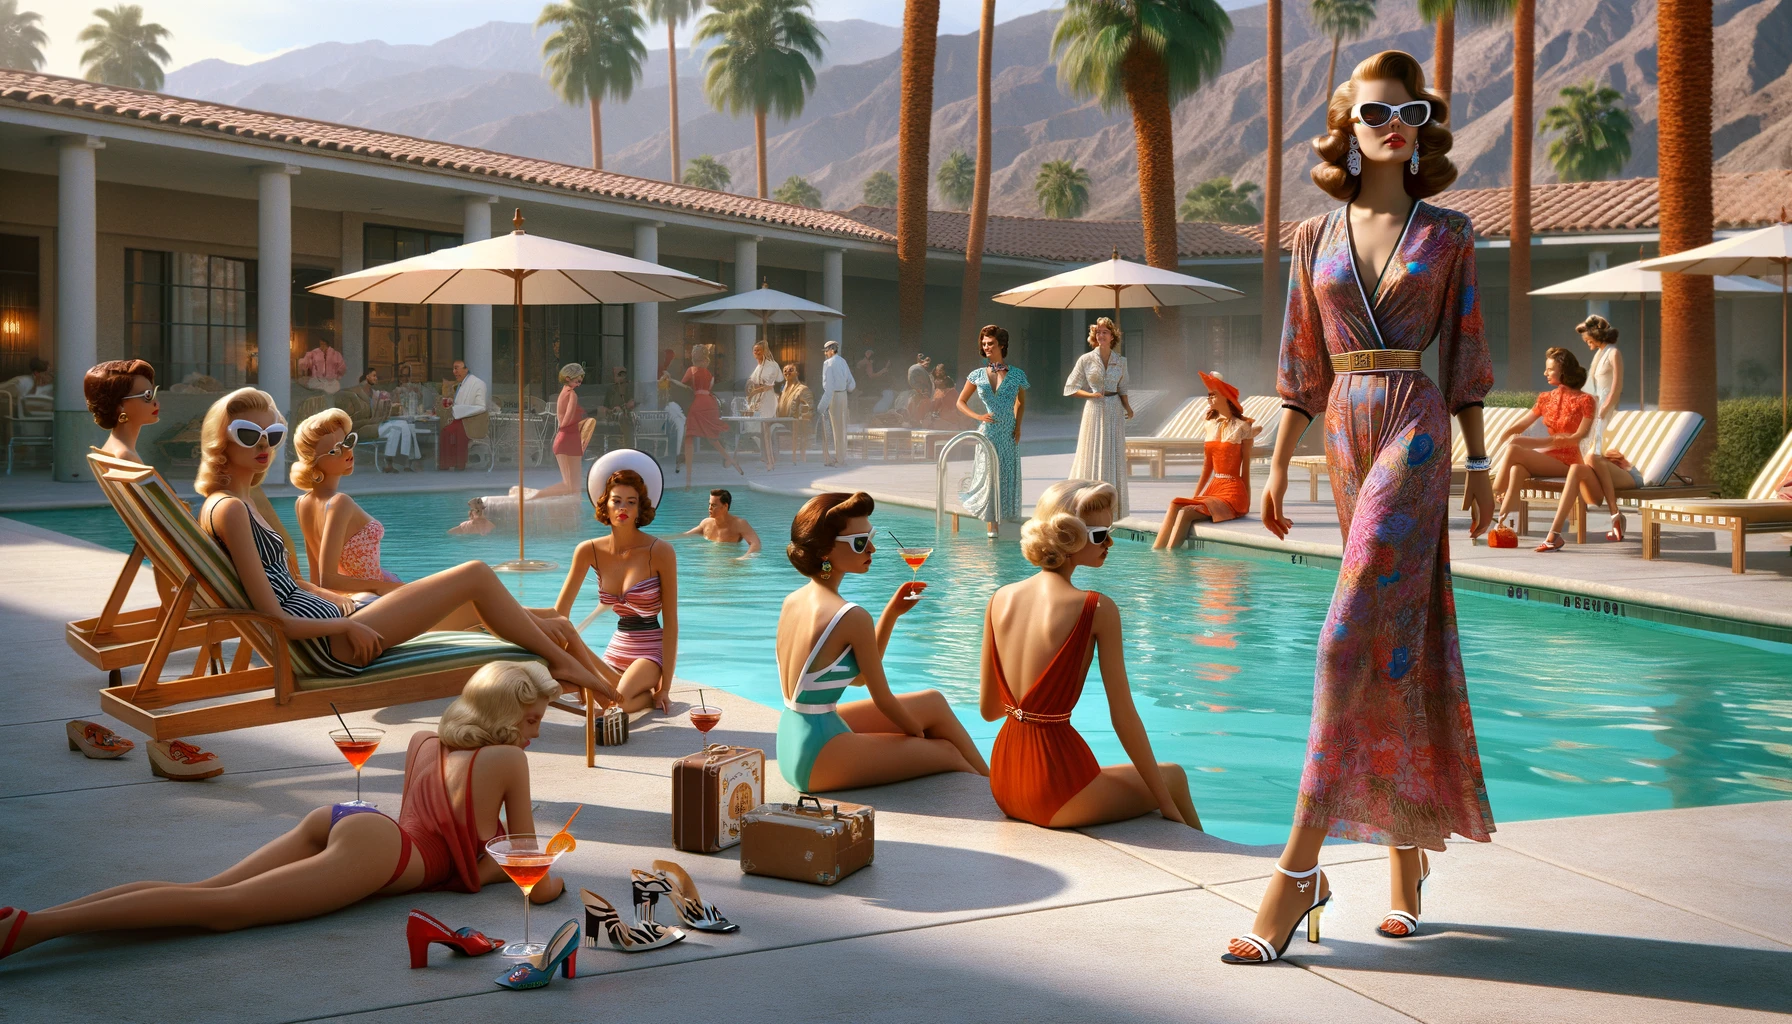 1950s Palm Springs glamour and glitz